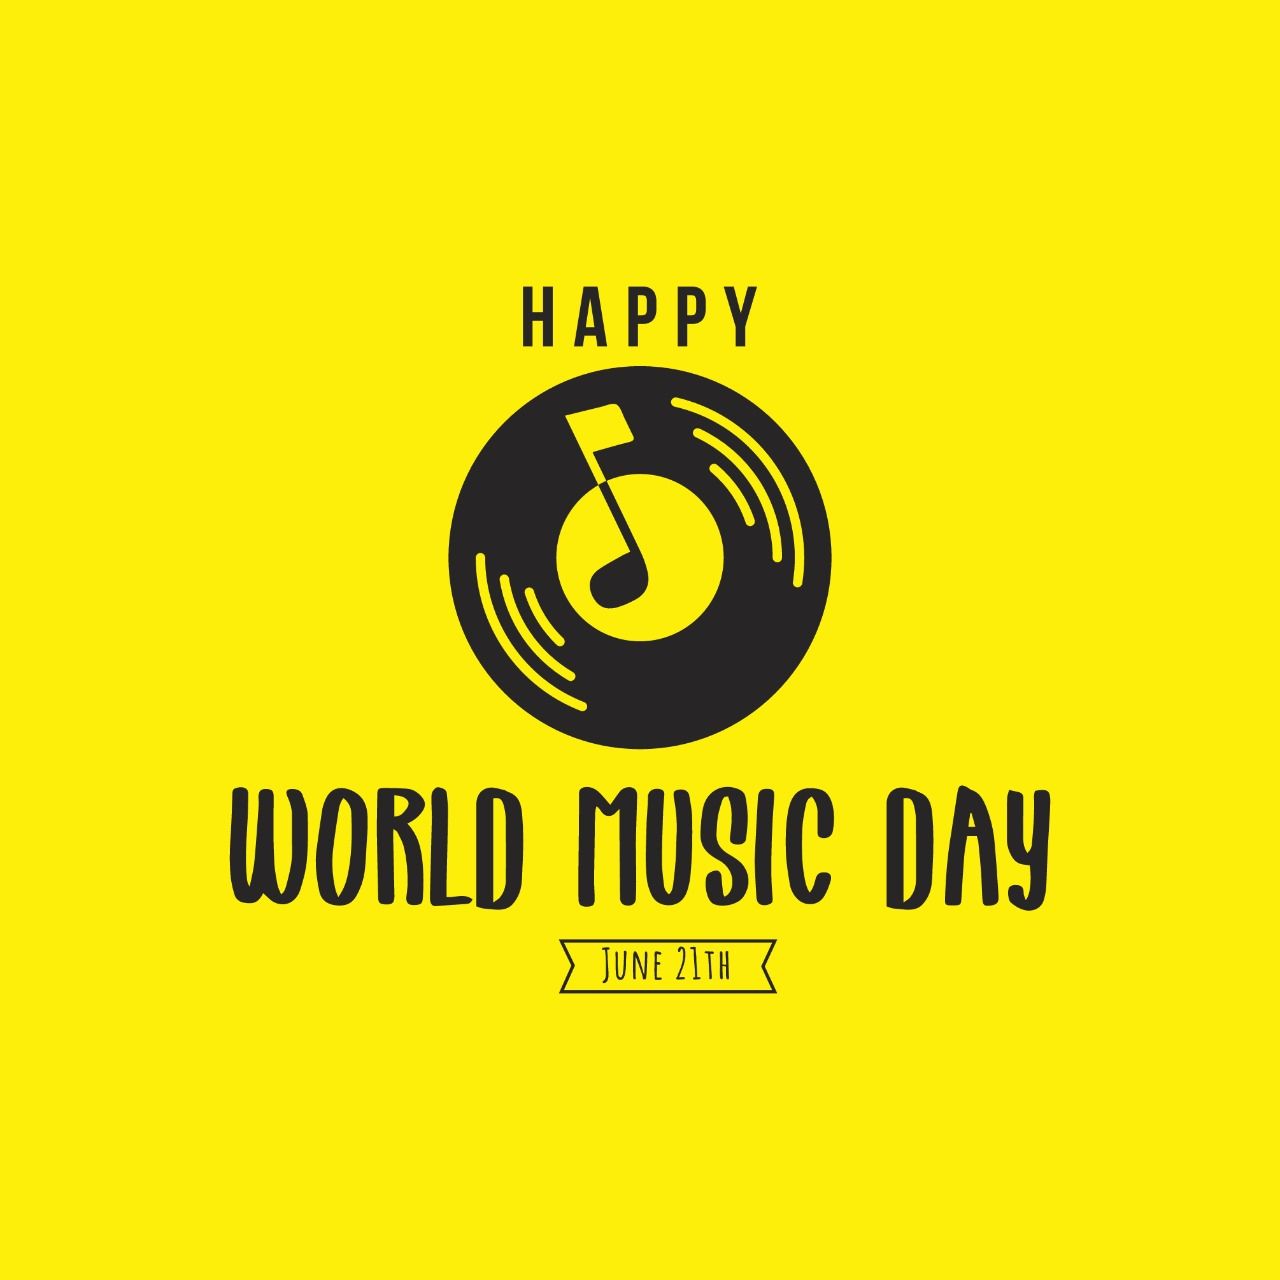 World Music Day 2020 Quotes Wishes Images Wallpapers Messages, & WhatsApp Video Status